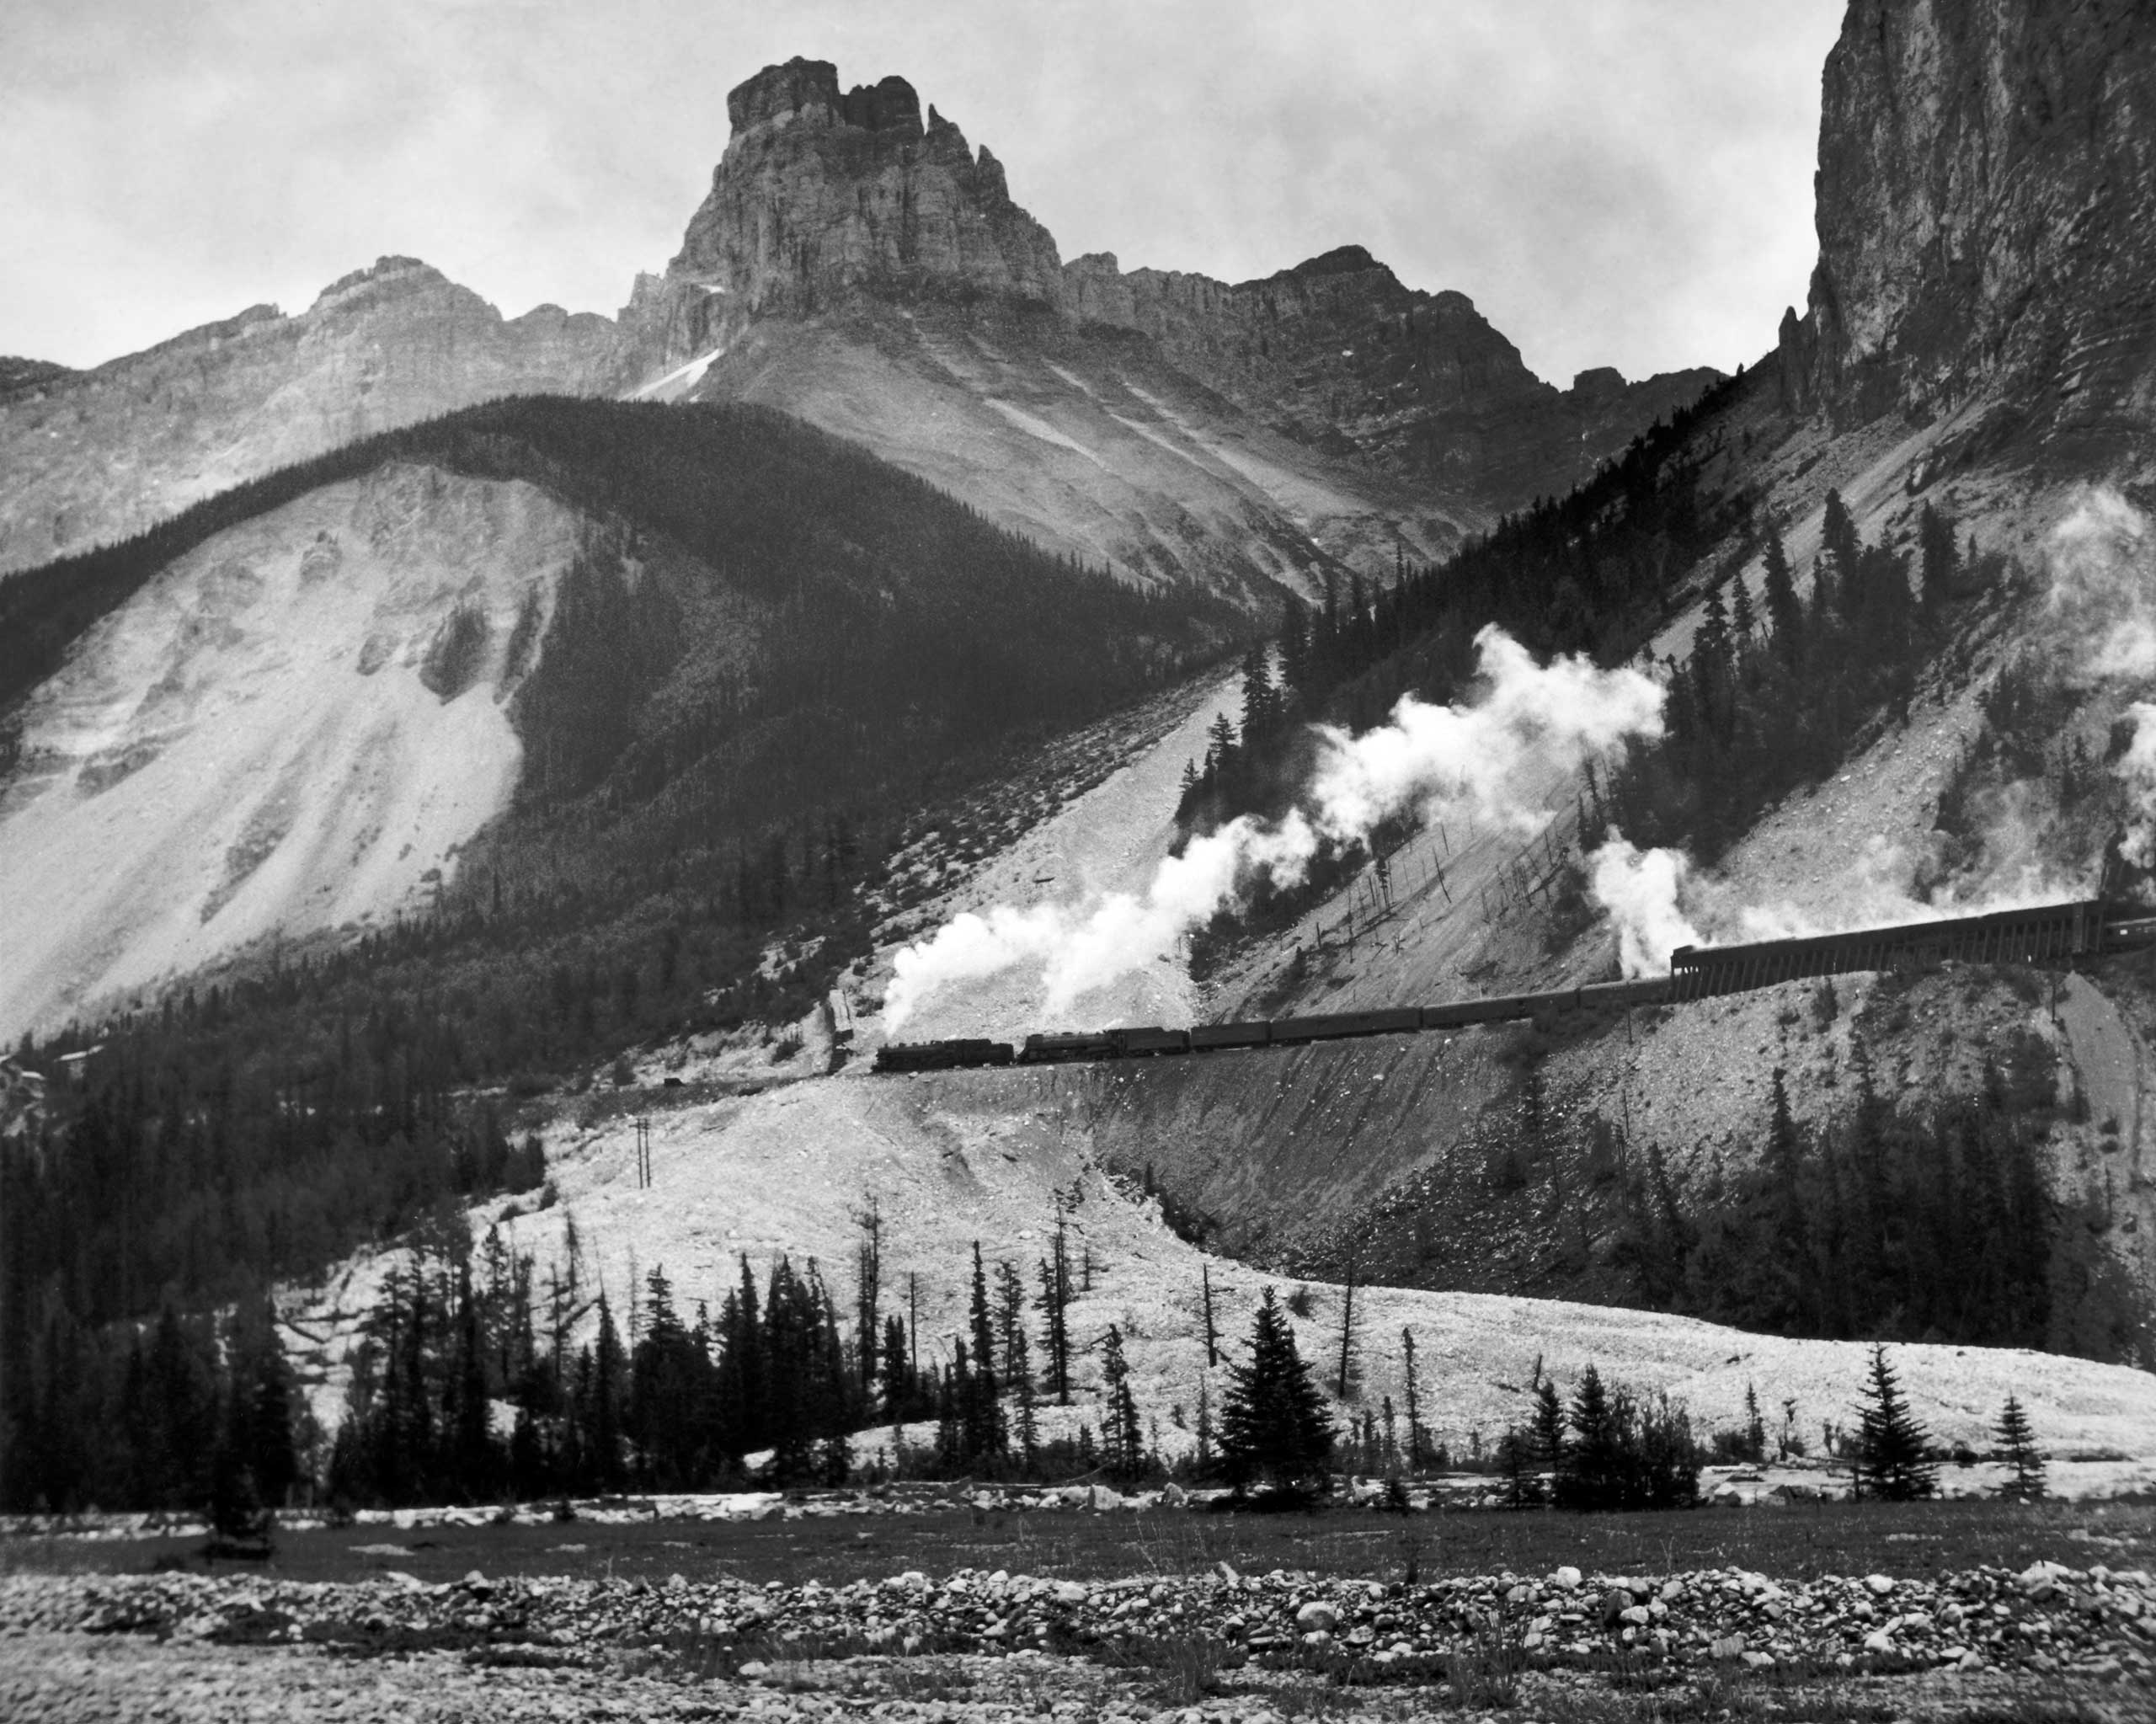 A freight train moves through the mountains of the President Range, Yoho National Park, British Columbia, Canada, 1951. Photo taken during the National Film Board of Canada's production of 'Yoho: Wonder Valley,' a panorama of Rocky Mountain scenery, with the vacation lures of Yoho National Park displayed in ever-changing color.